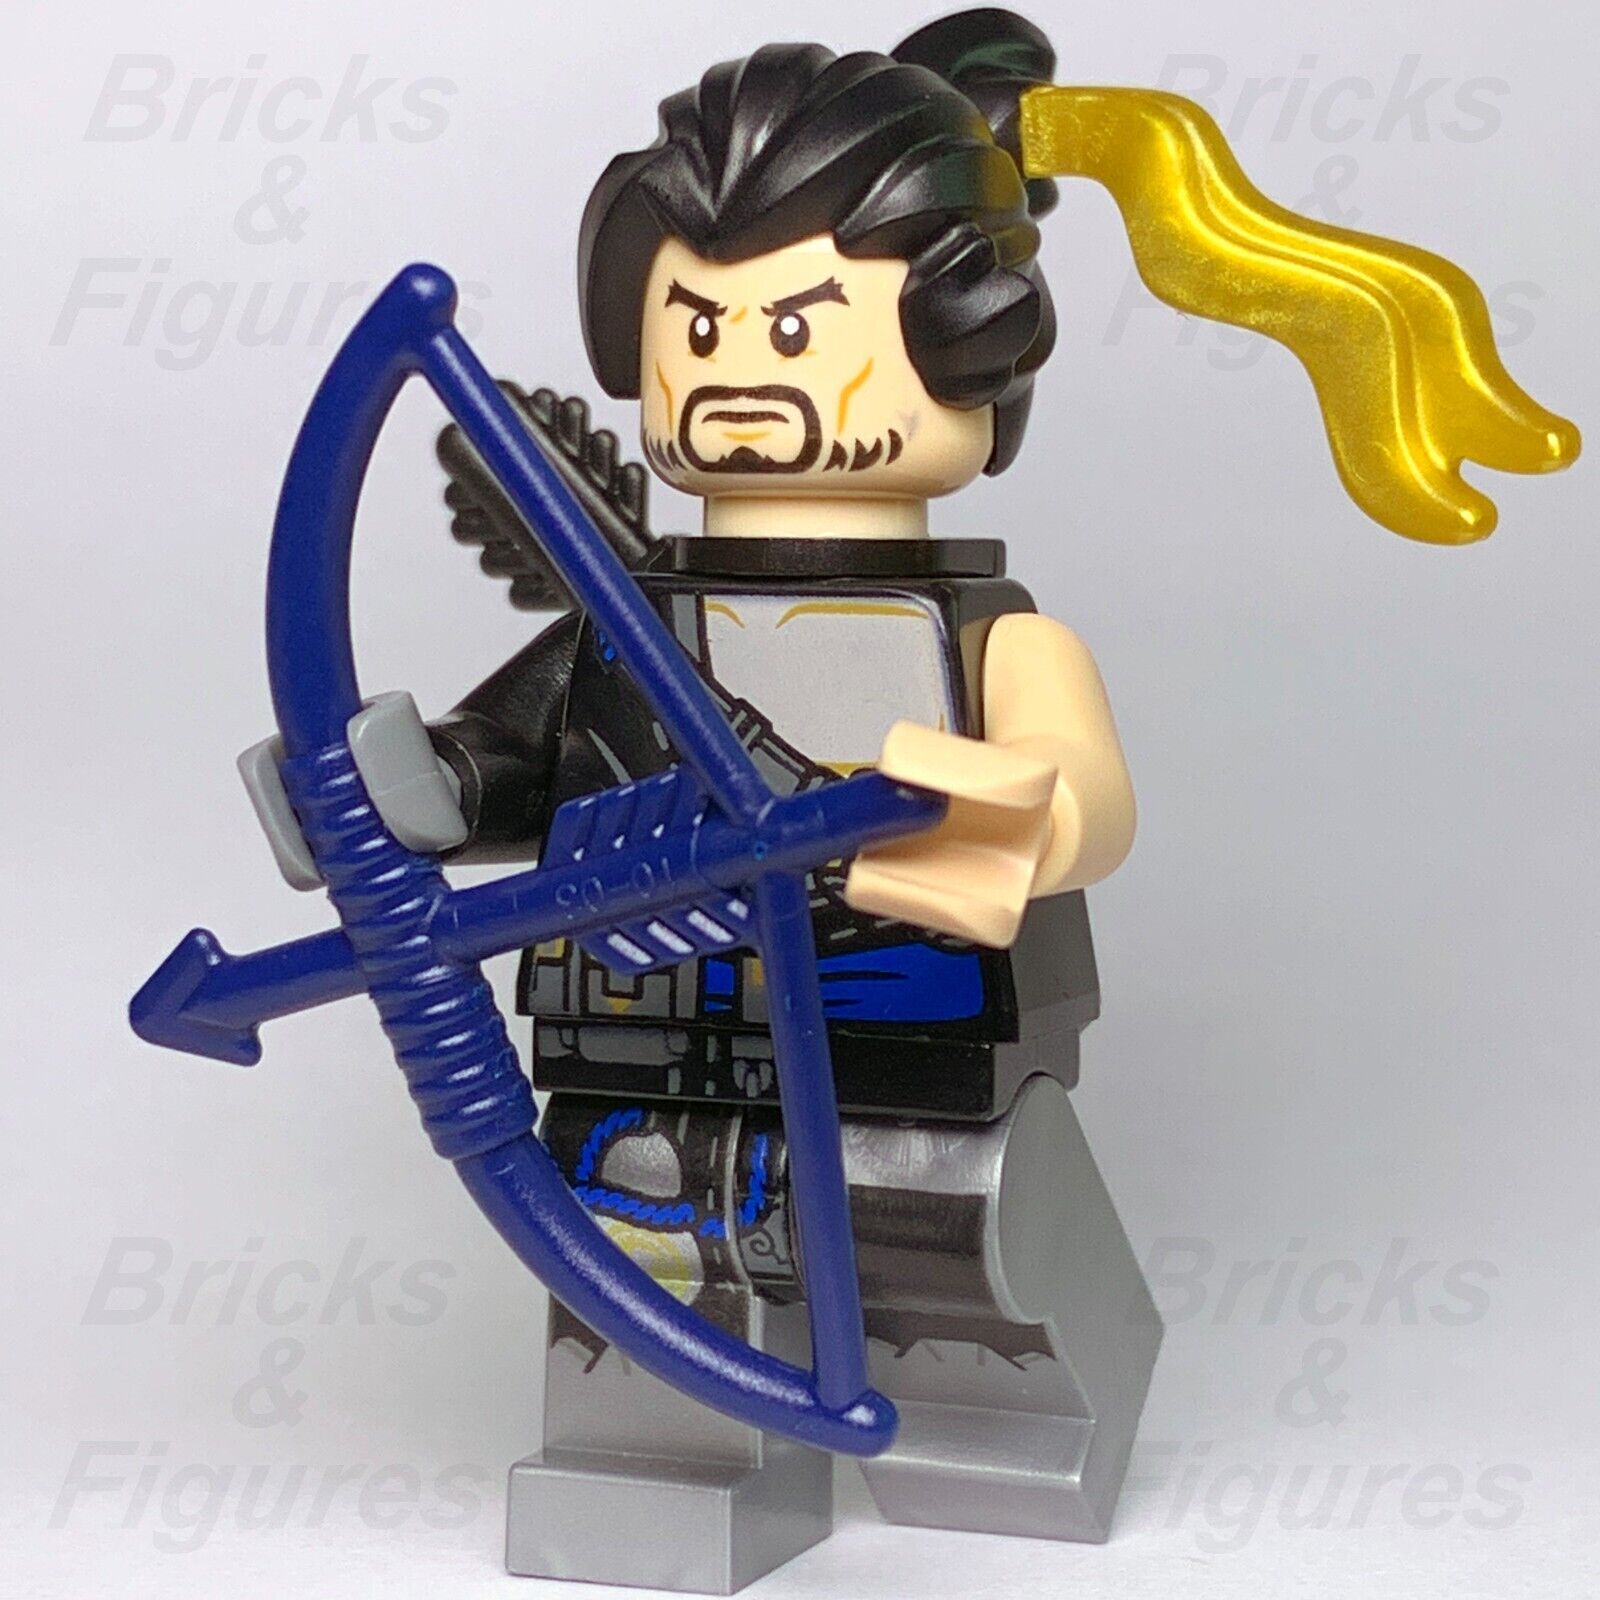 LEGO Overwatch Hanzo Shimada Minifigure Assassin Minifig with Bow 75971 ow003